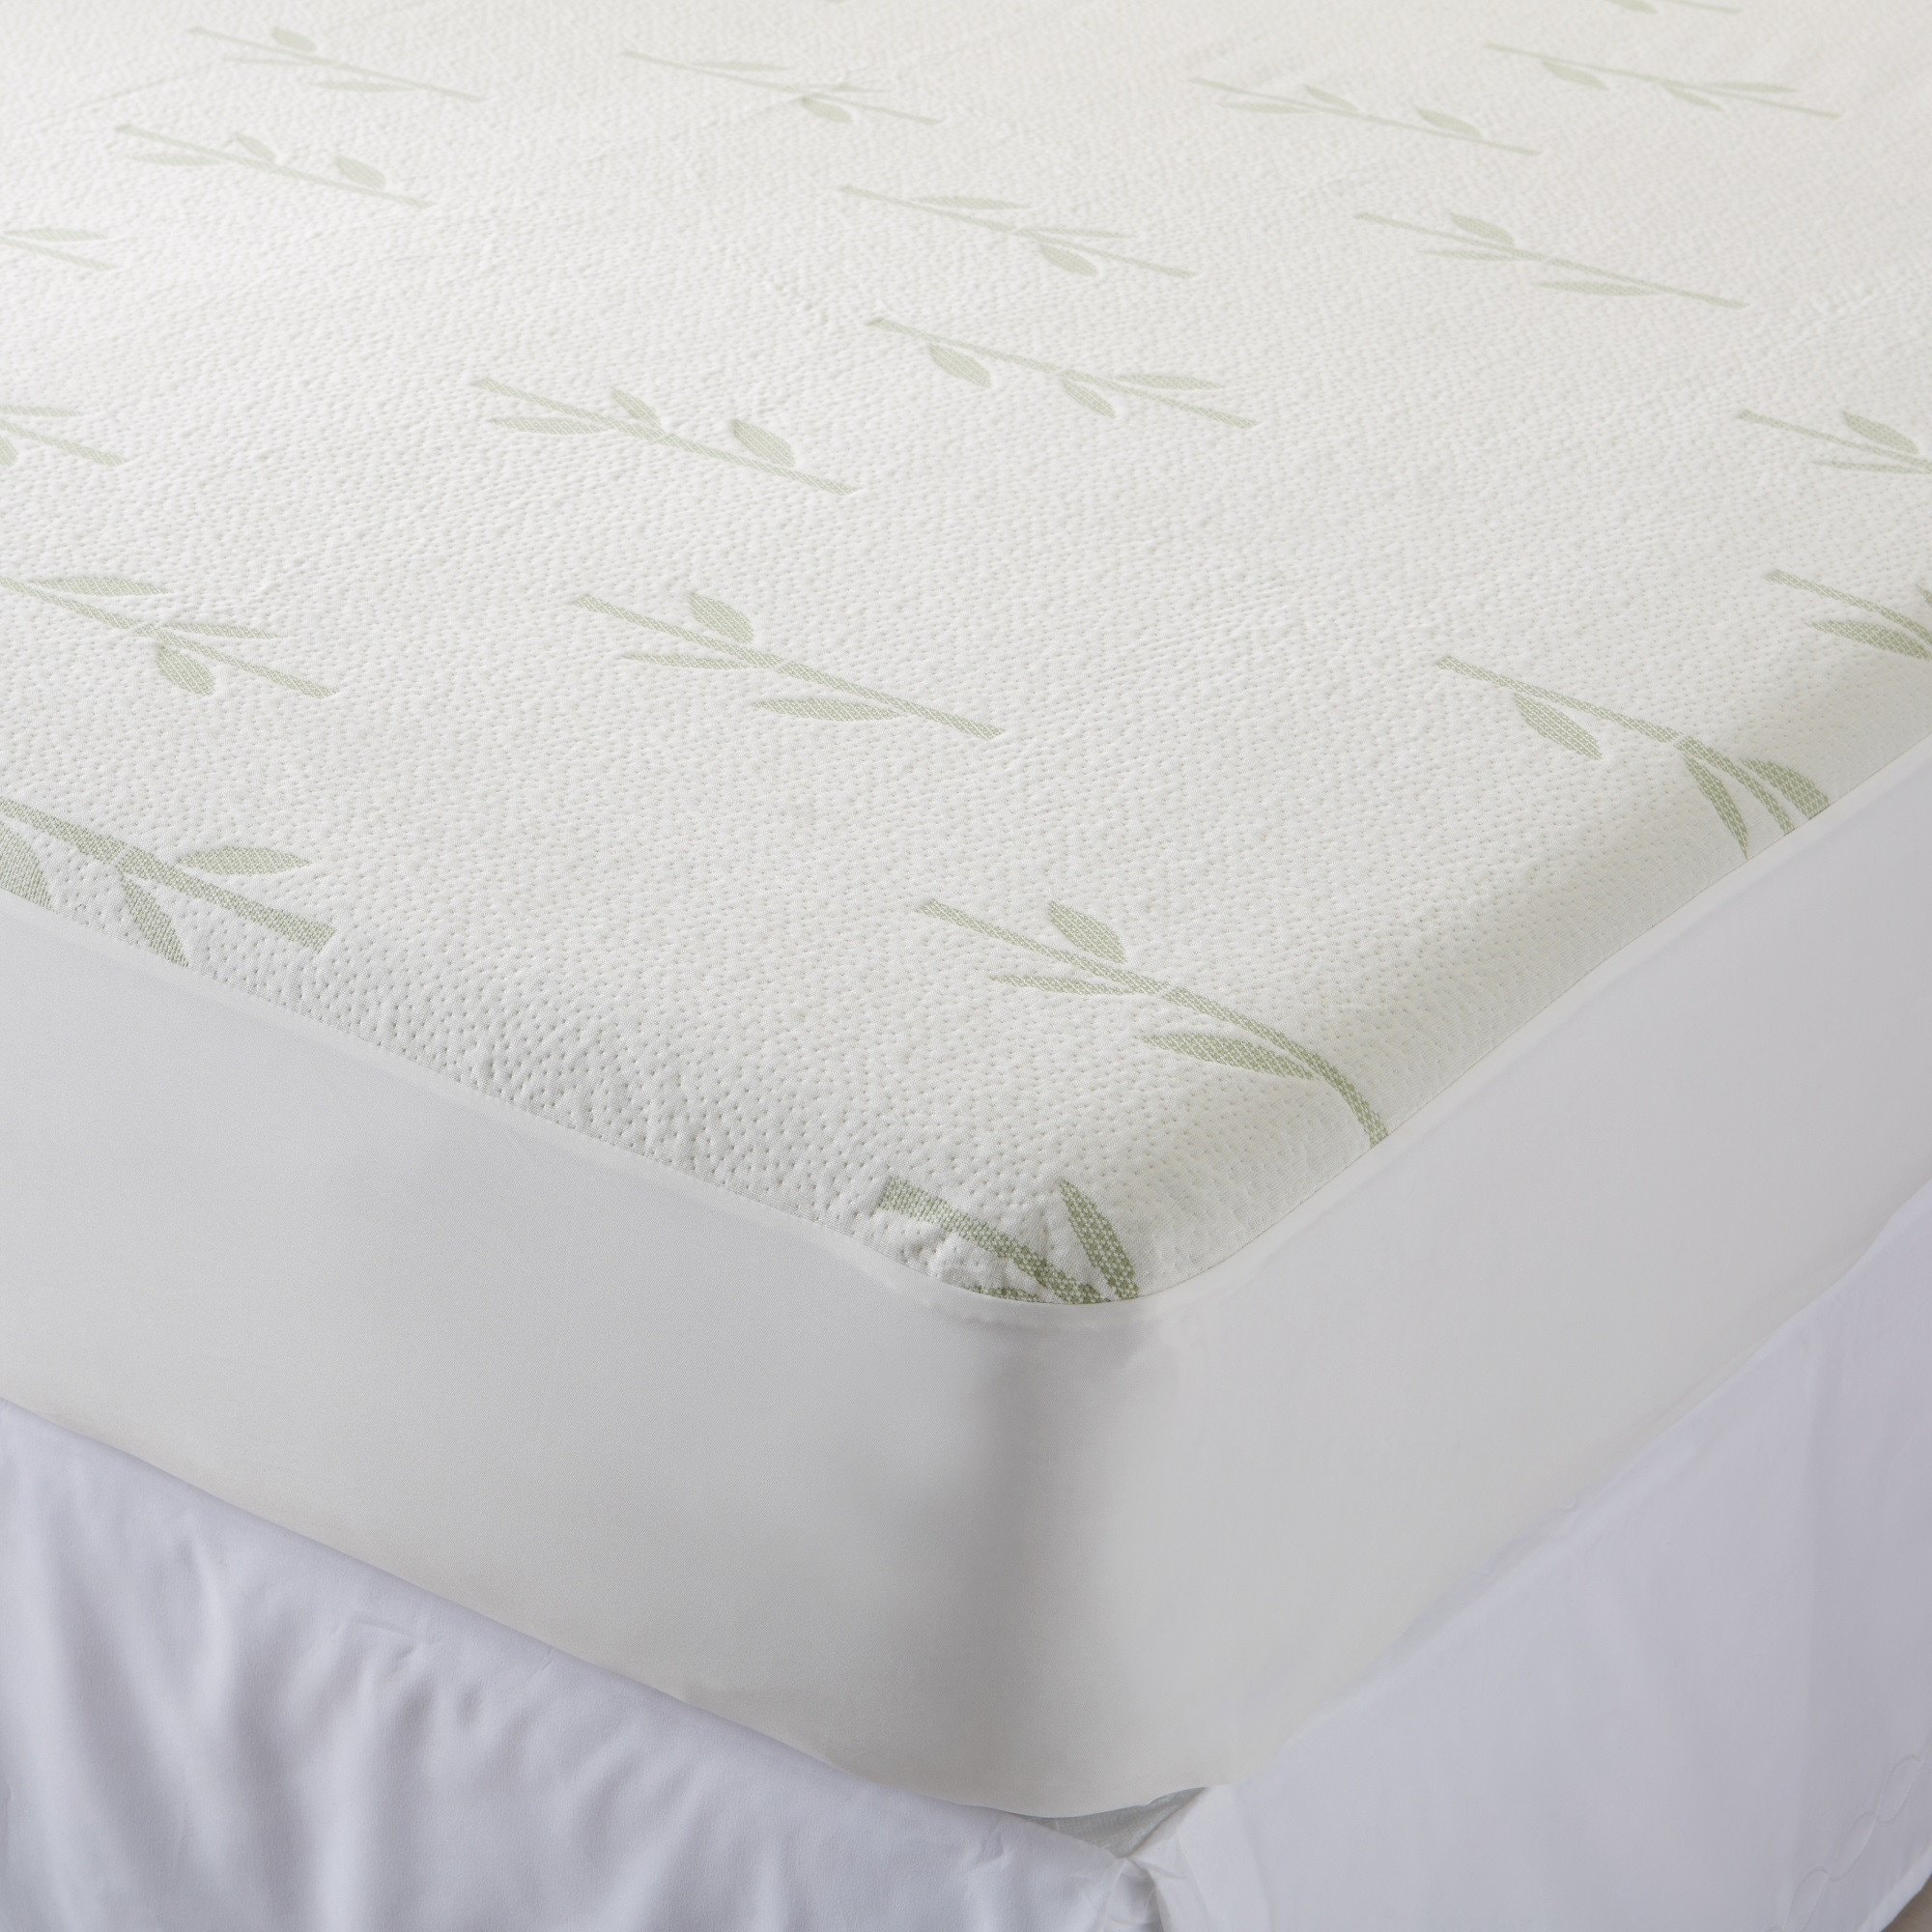 Waterproof Bamboo Mattress Protector - White - On Sale - Bed Bath ...